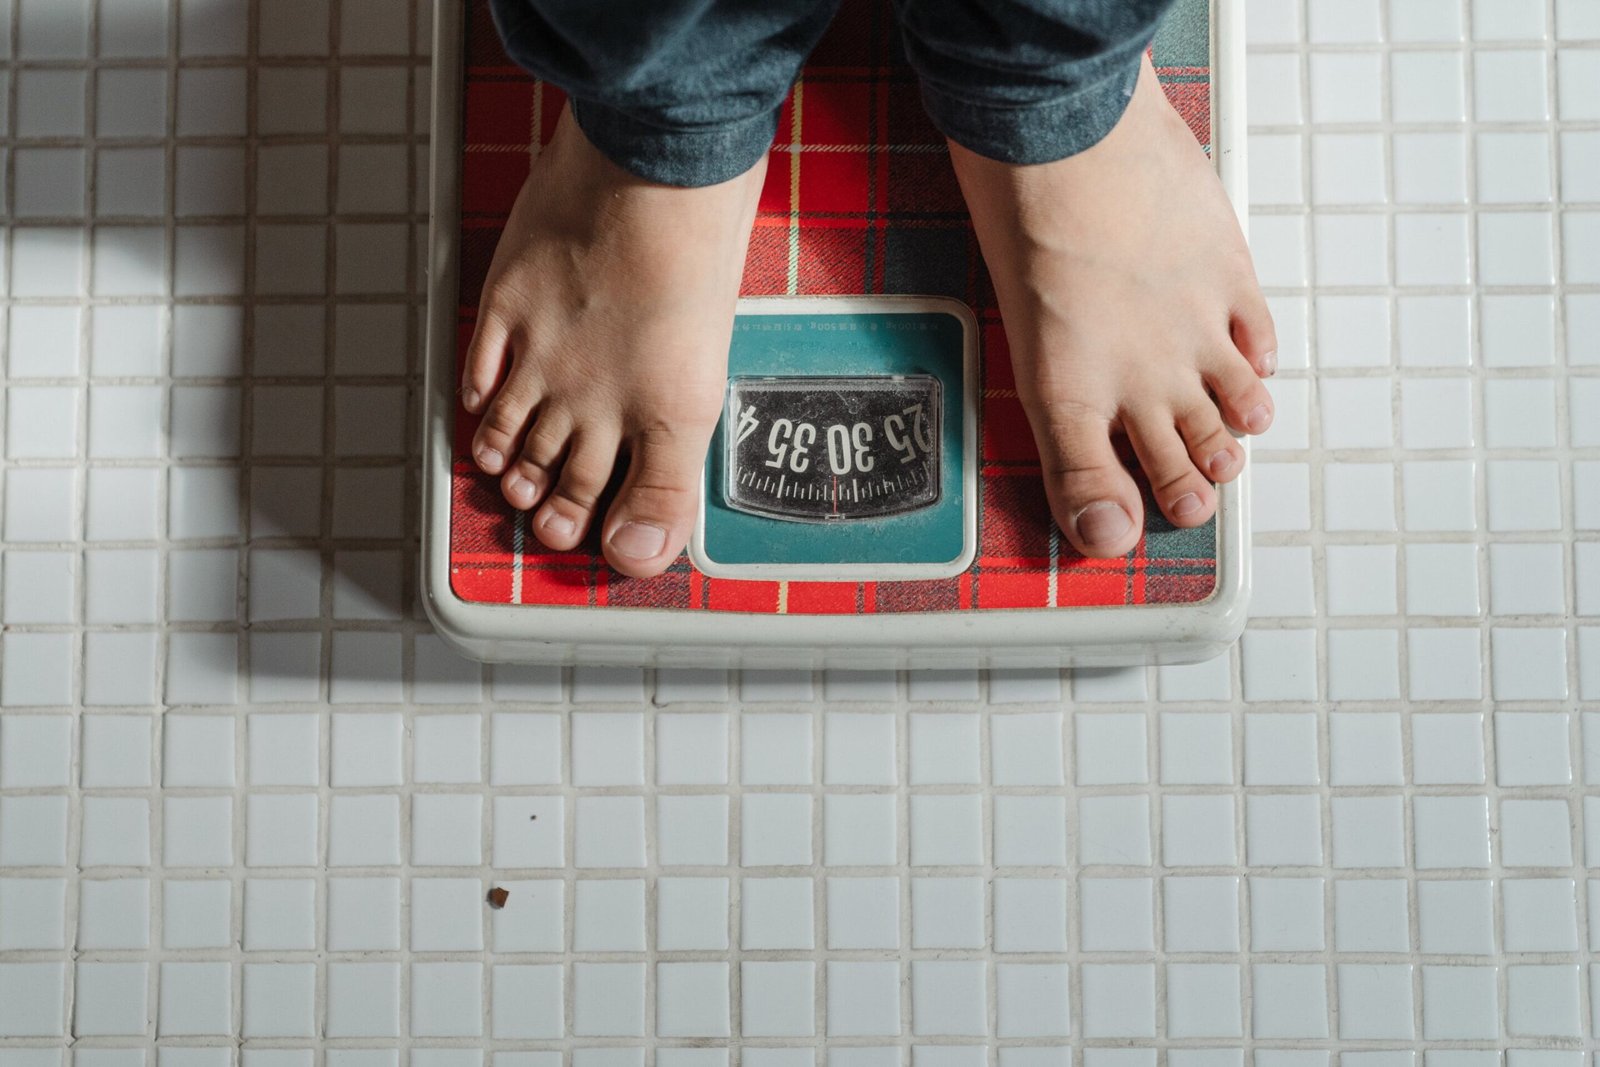 Text messages with financial incentives can help men who are living with obesity lose weight UK study finds